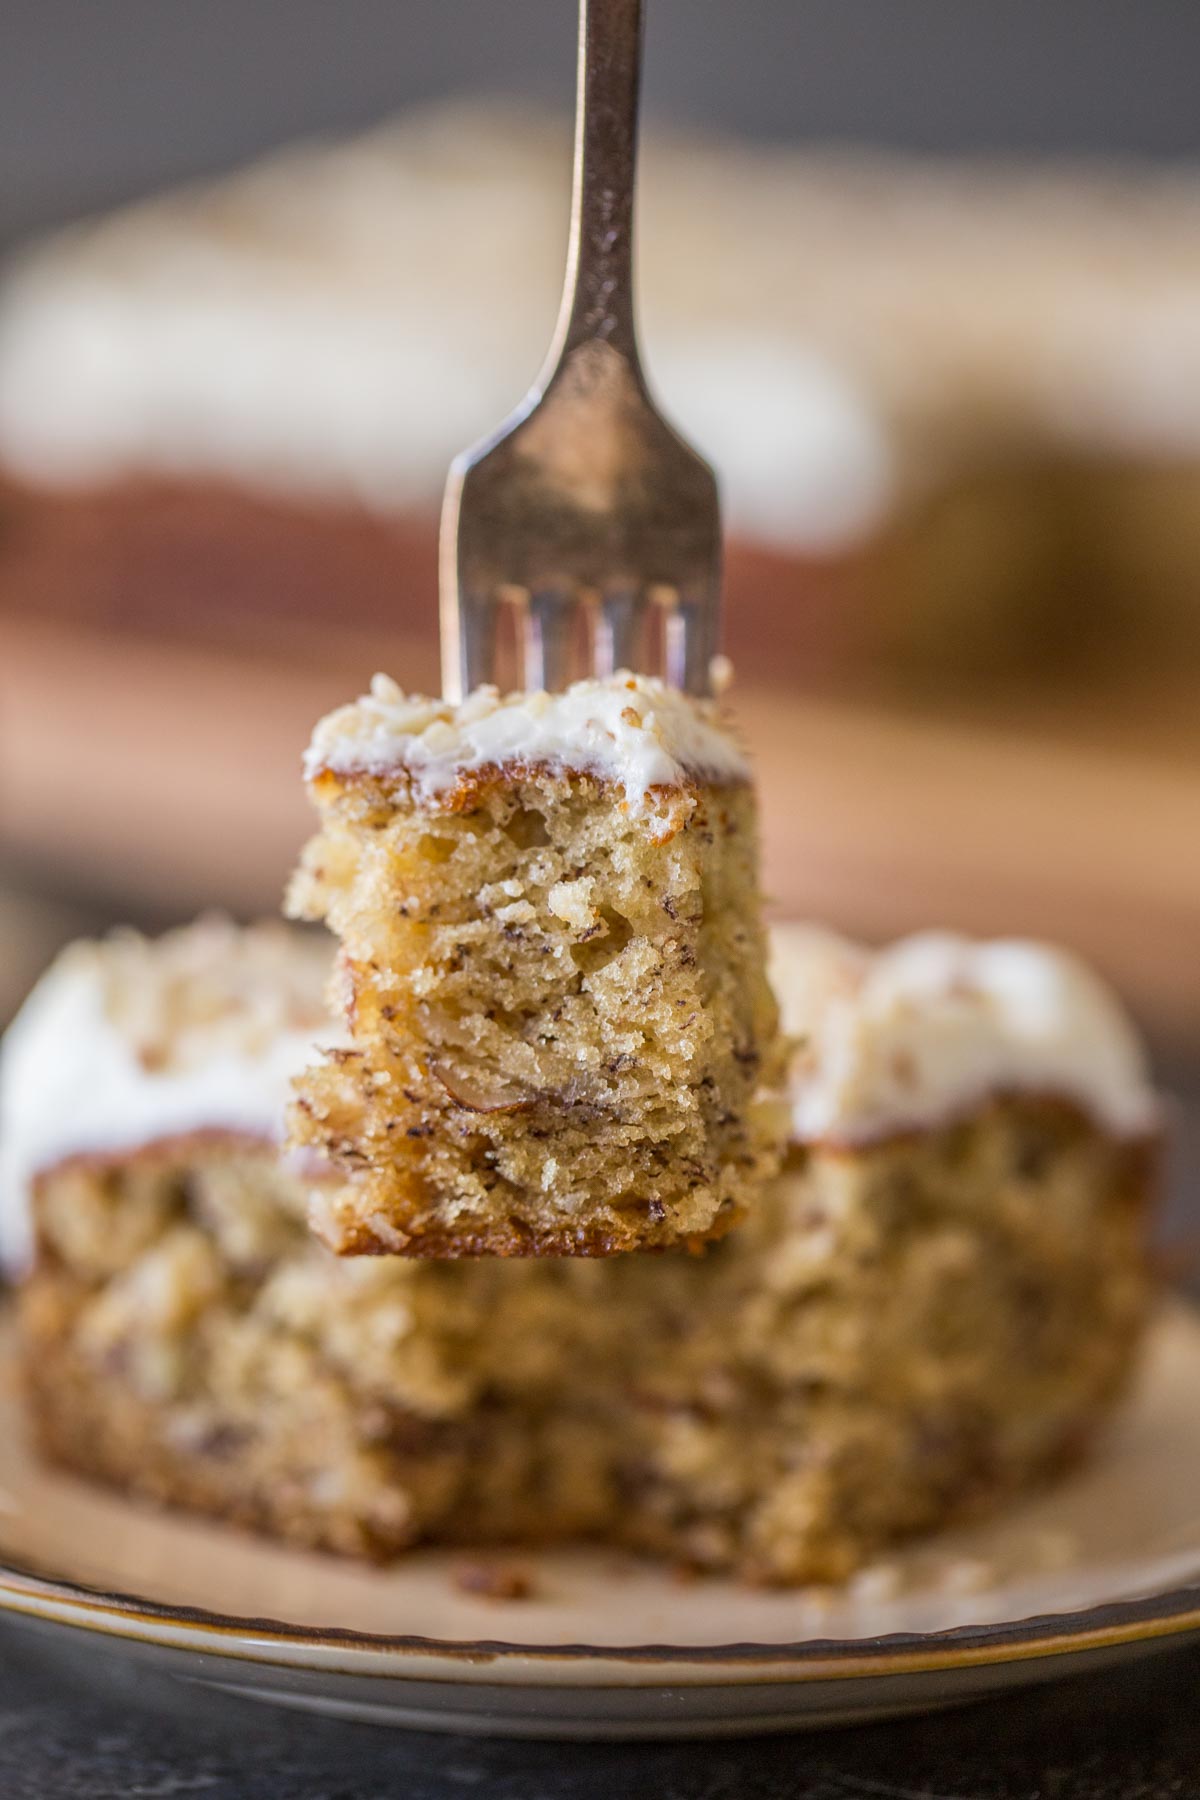 A fork with a bite of the Banana Cake with Fluffy Cream Cheese Frosting on it, with the rest of the piece of cake on a plate in the background.